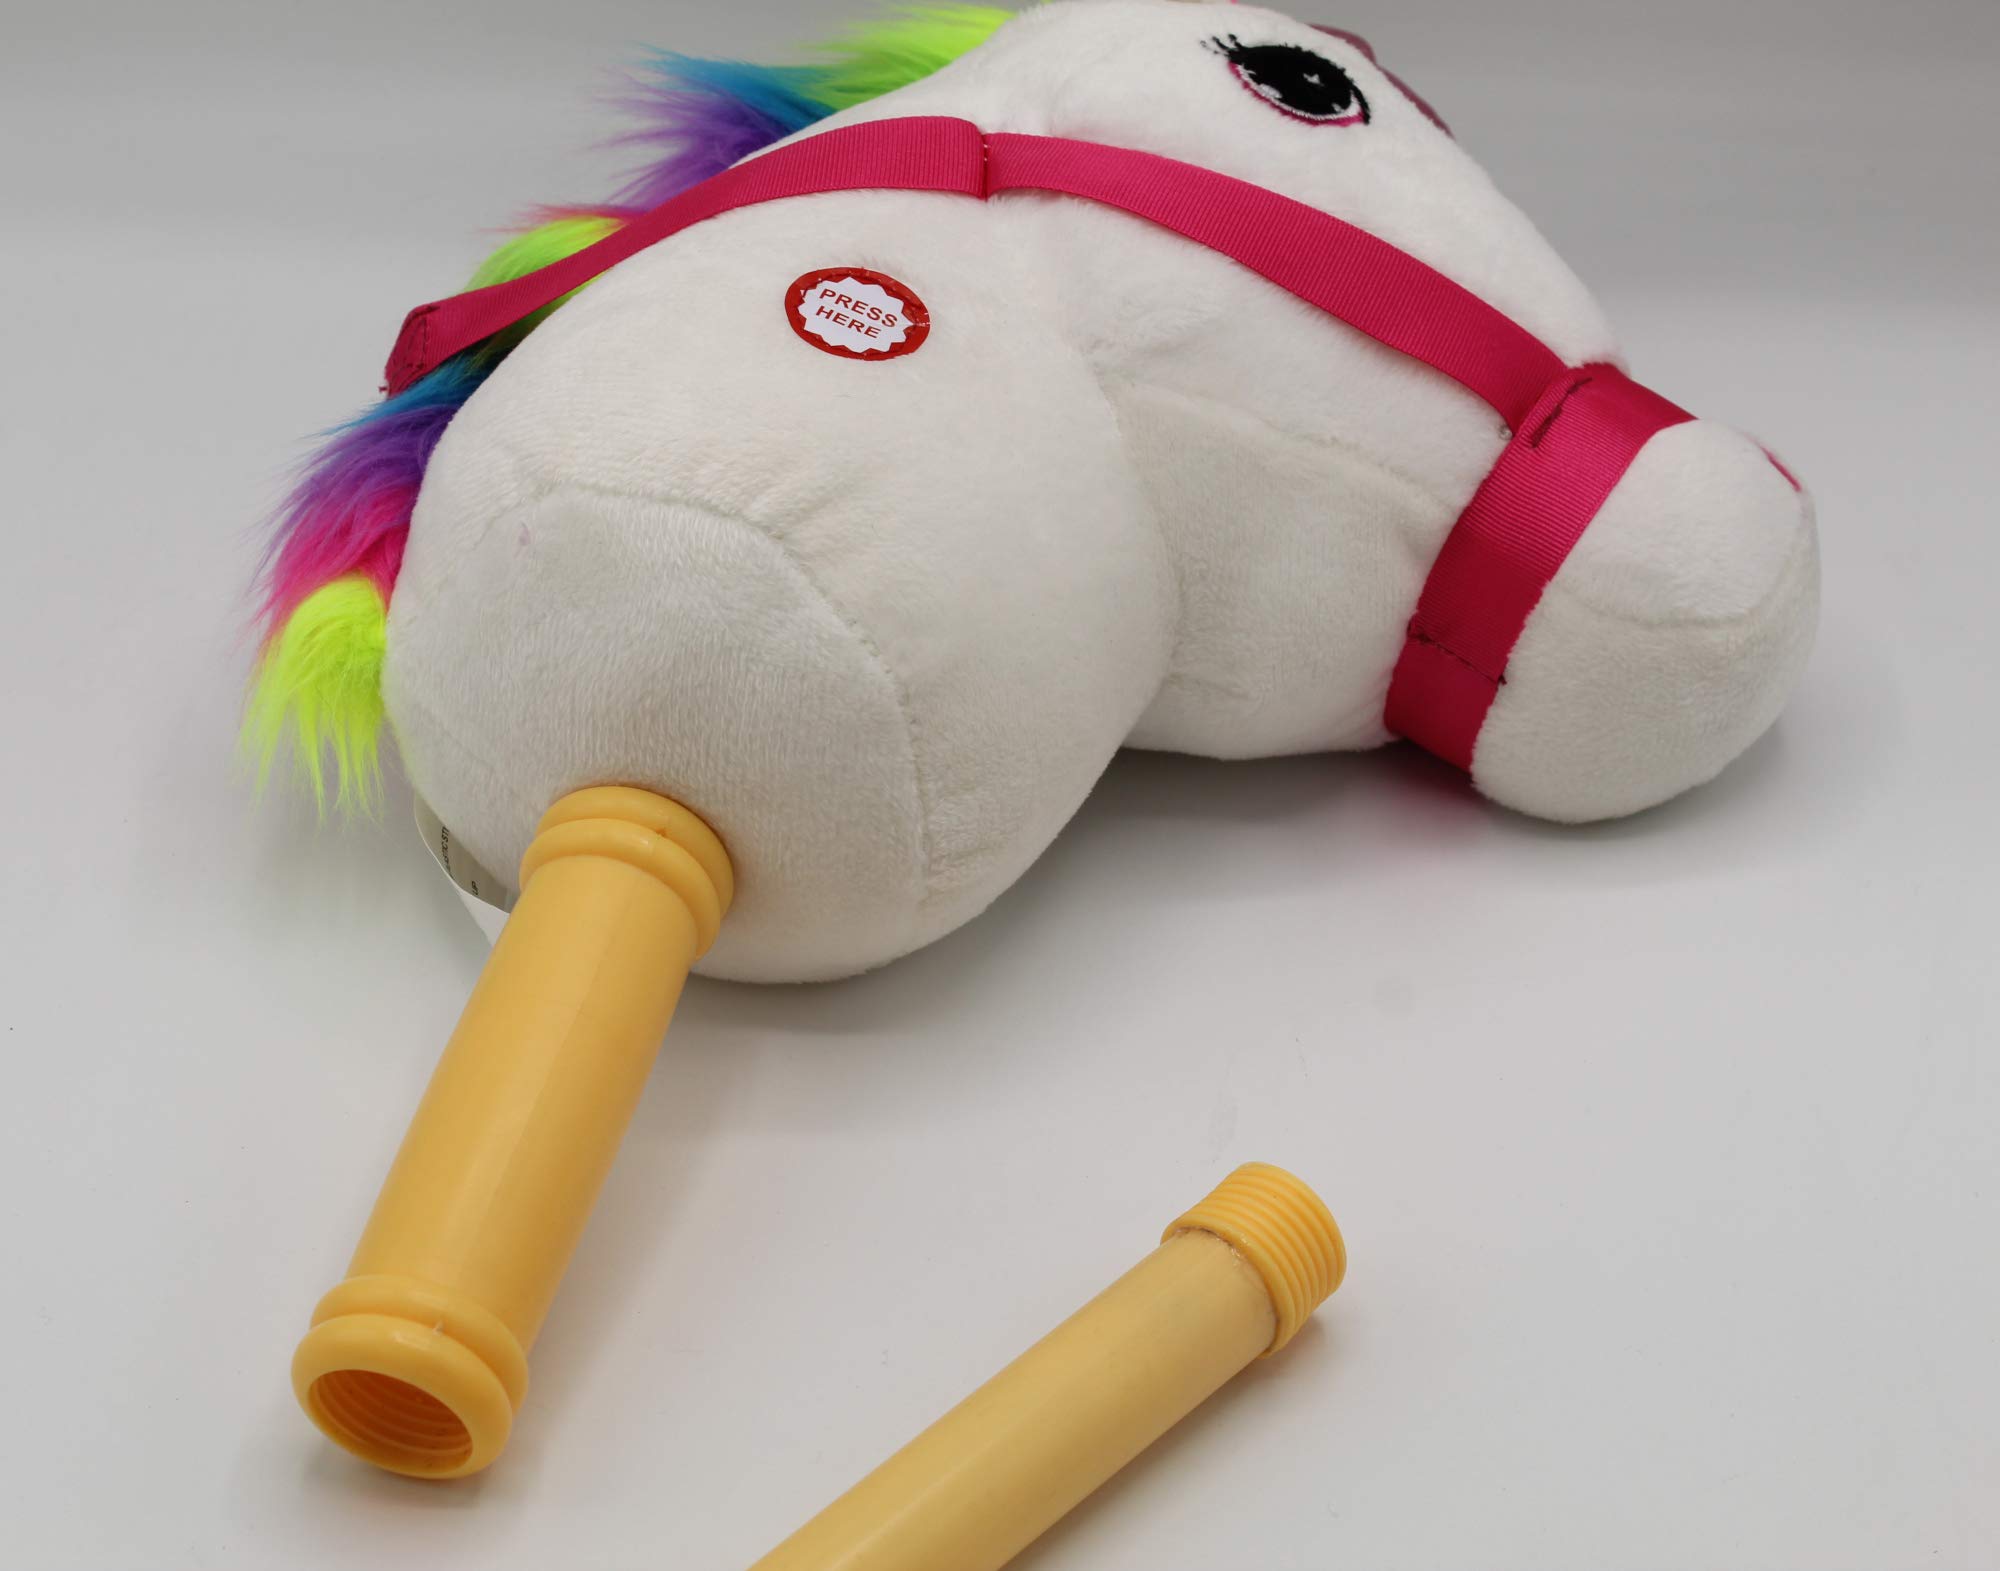 PonyLand: White Unicorn Stick Horse, Sound Effects That Make The Unicorn Come to Life, Sturdy 2 Piece Stick That Screws Together, for Ages 3 and up